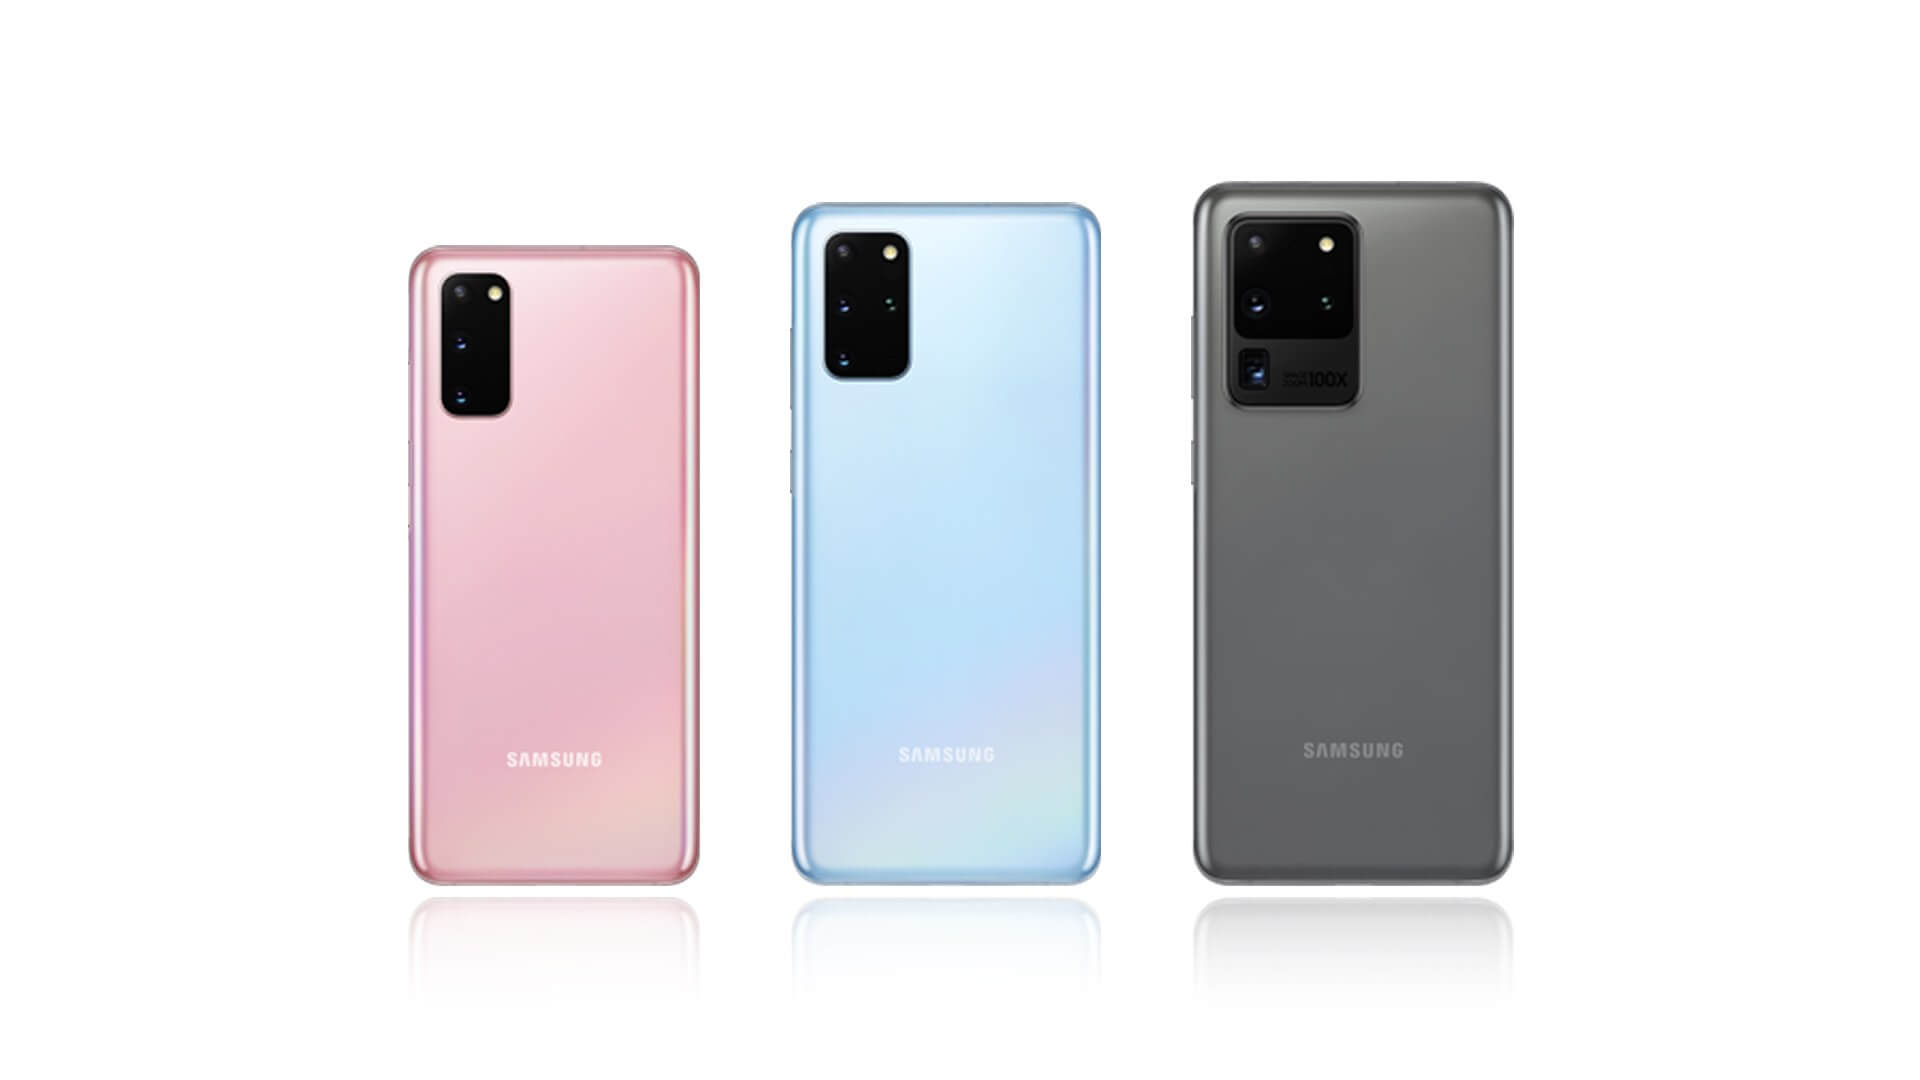 Samsung unveils Galaxy S20 5G lineup with new camera tech, AI, security, and more starting at $1,000 2